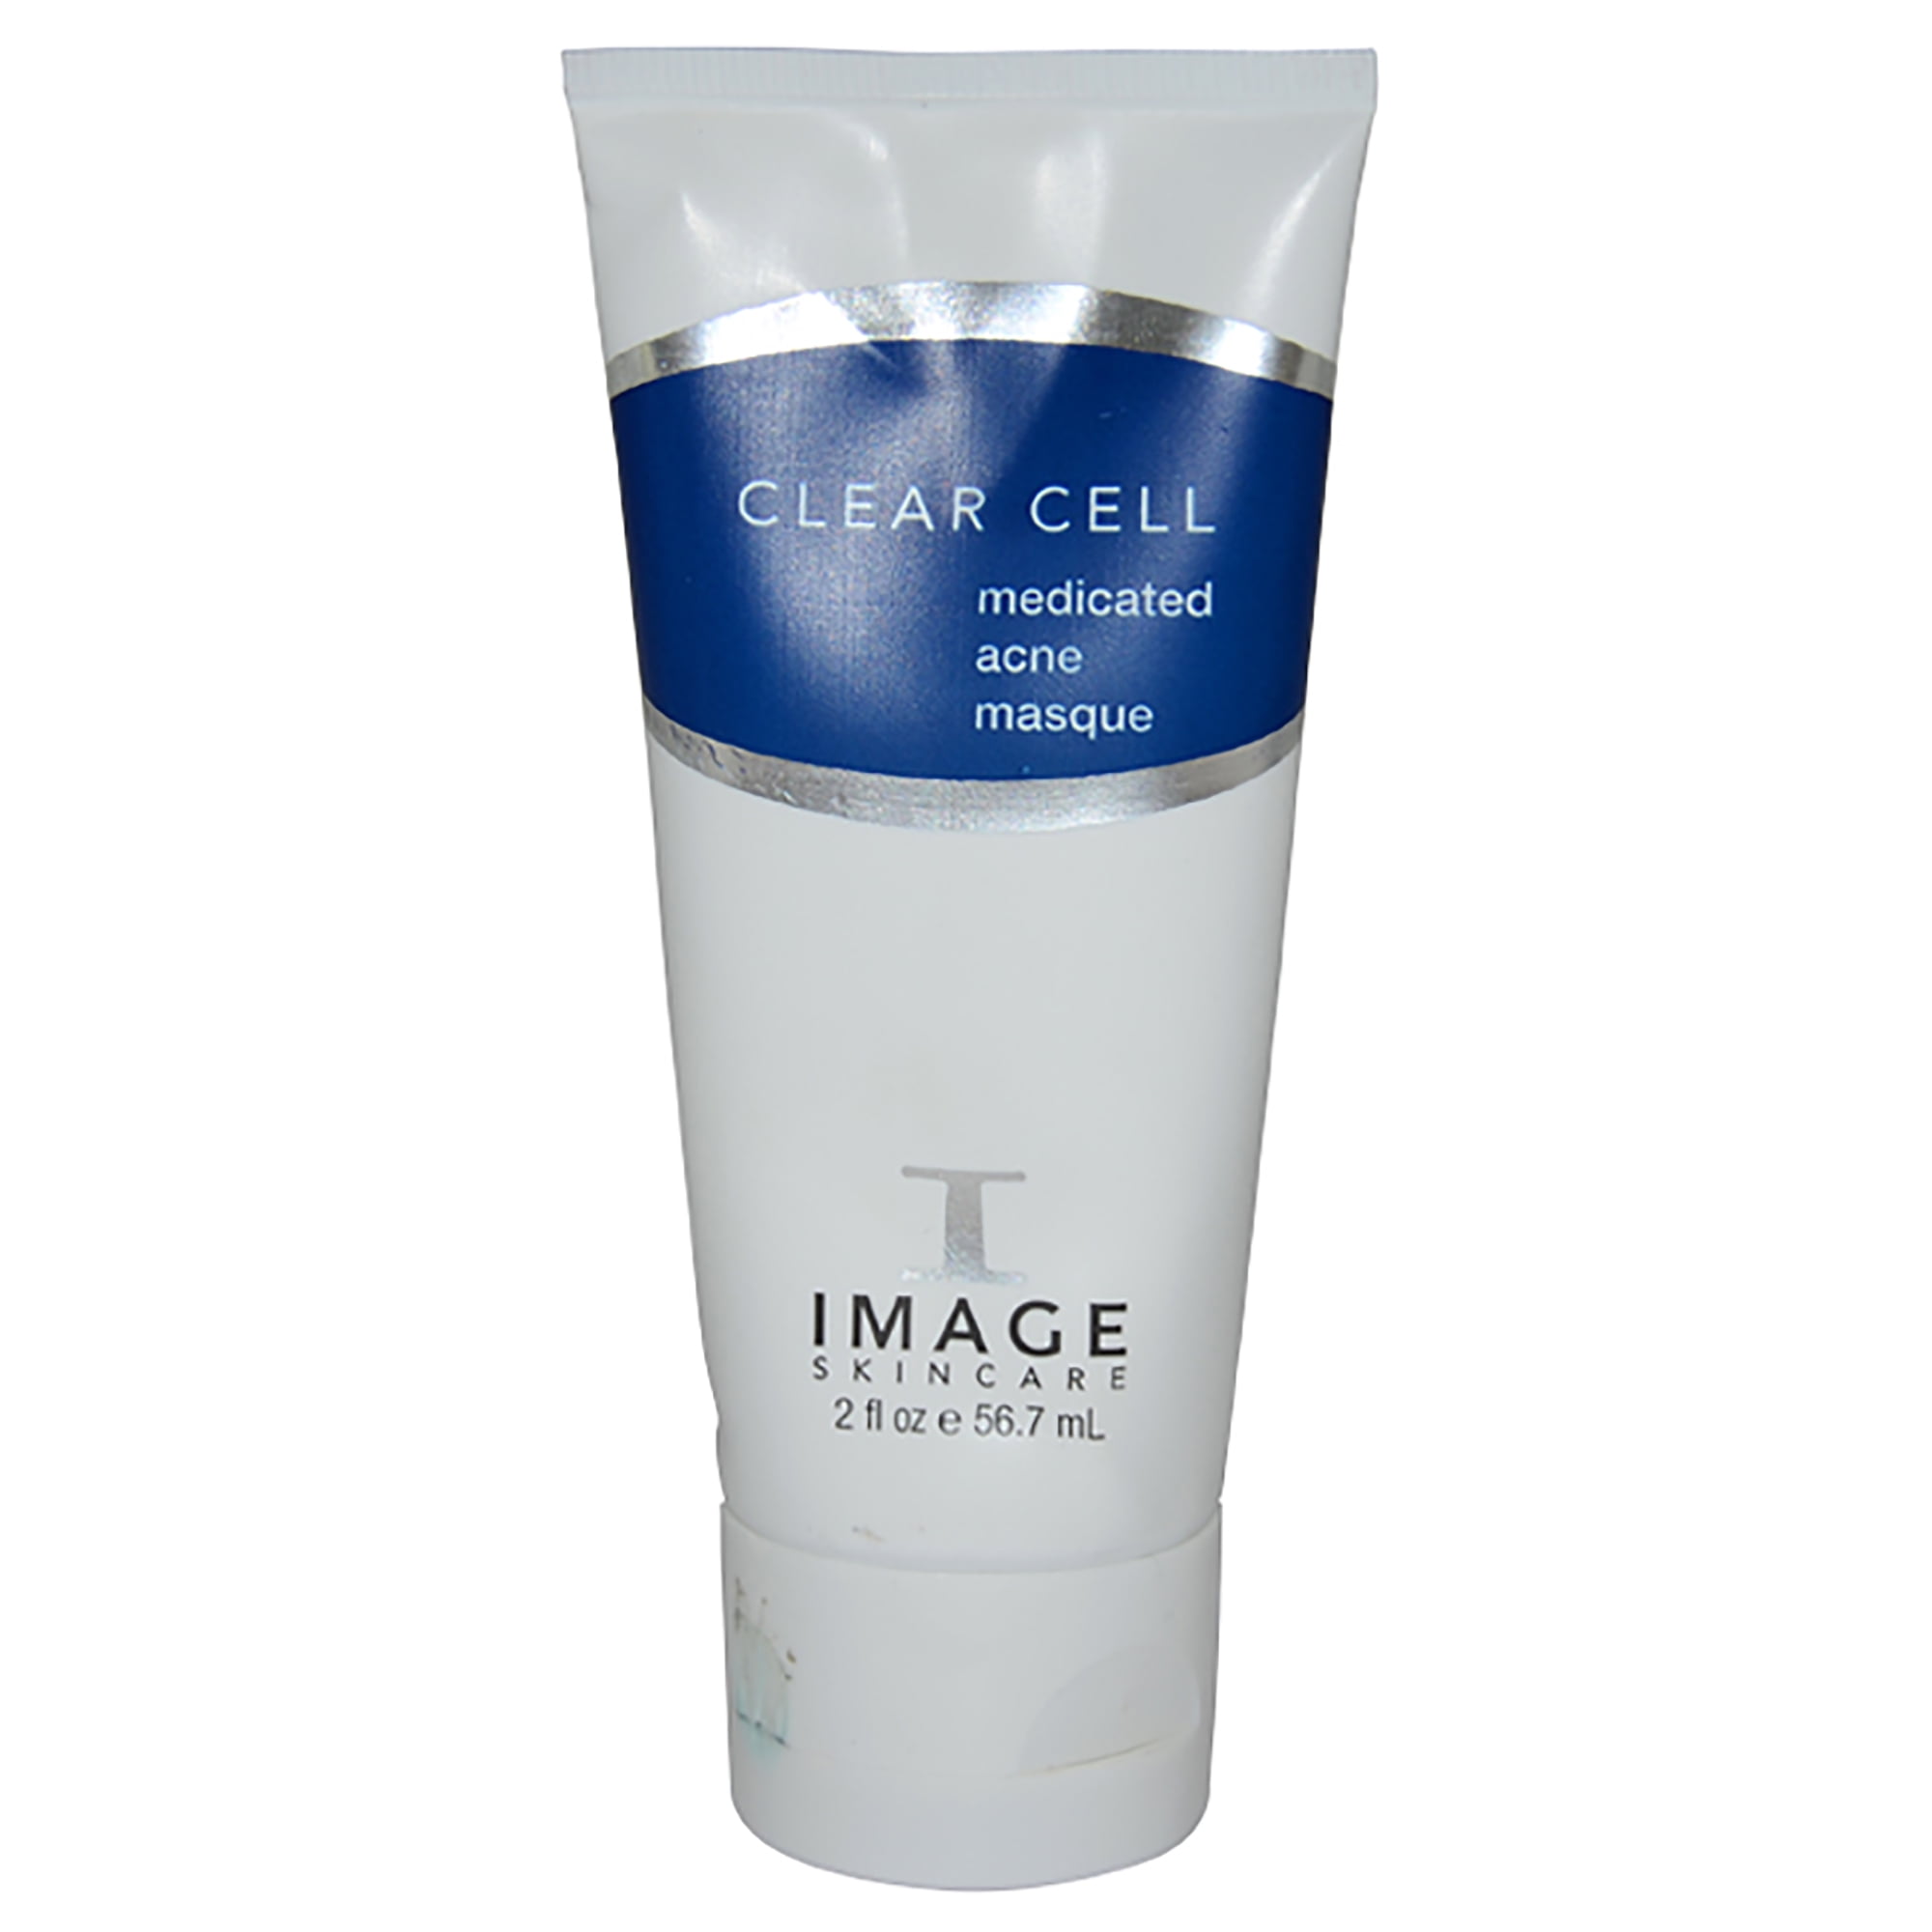 Image Skin Care Image Skin Care Clear Cell Medicated